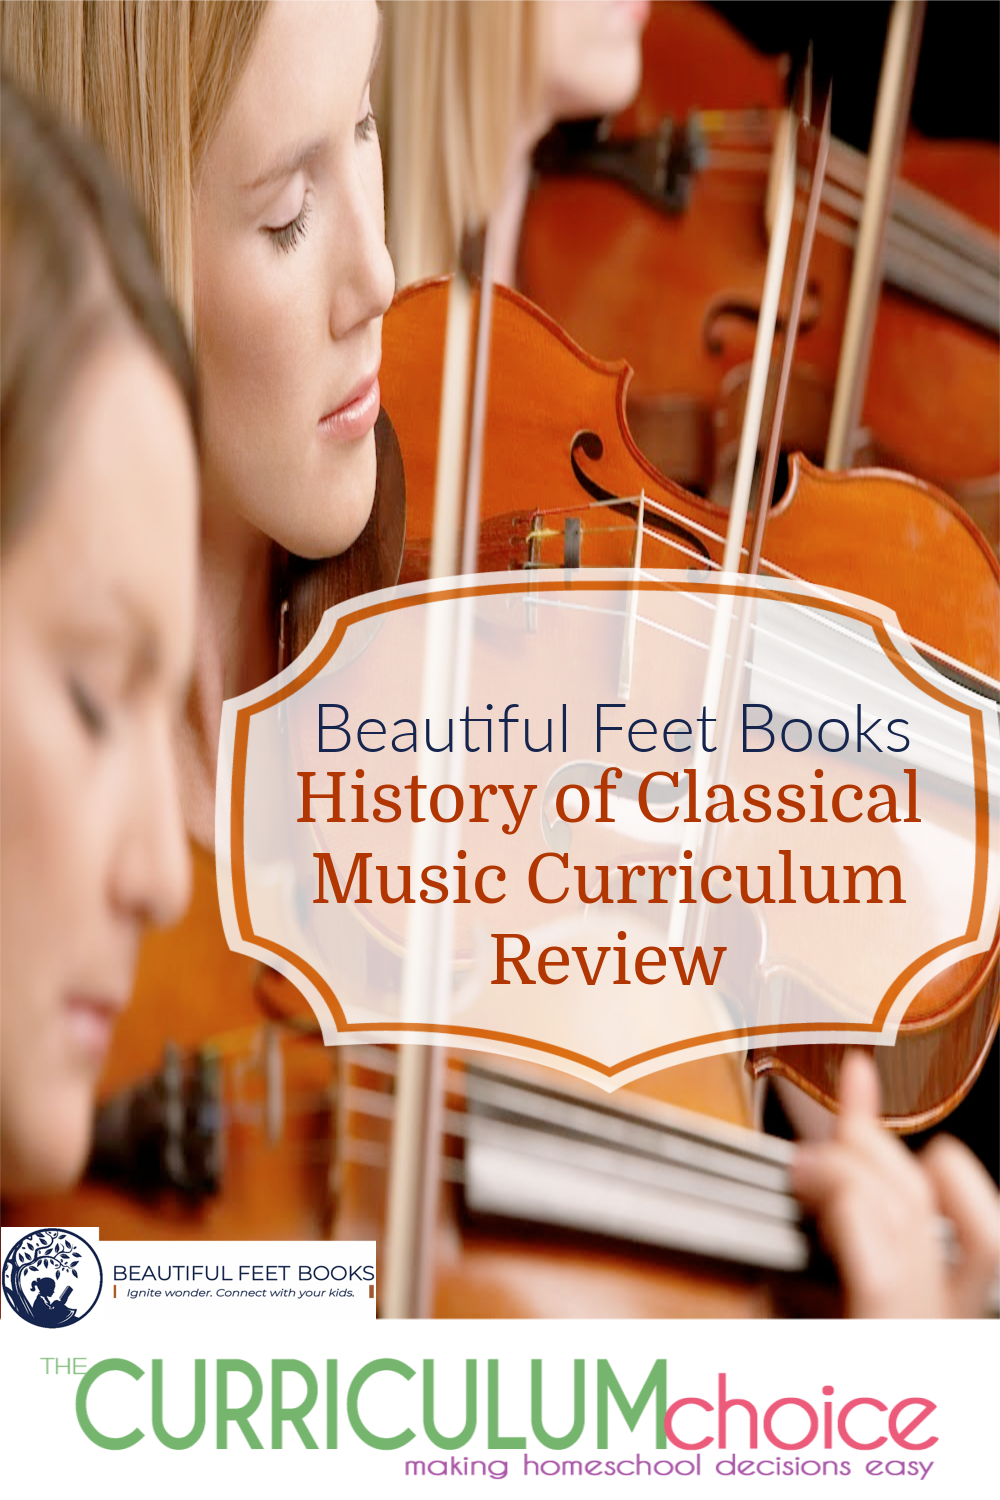 With Beautiful Feet History of Classical Music Curriculum students will learn about the world of classical music and composition from the Baroque Period to the Modern Period.. A review from The Curriculum Choice